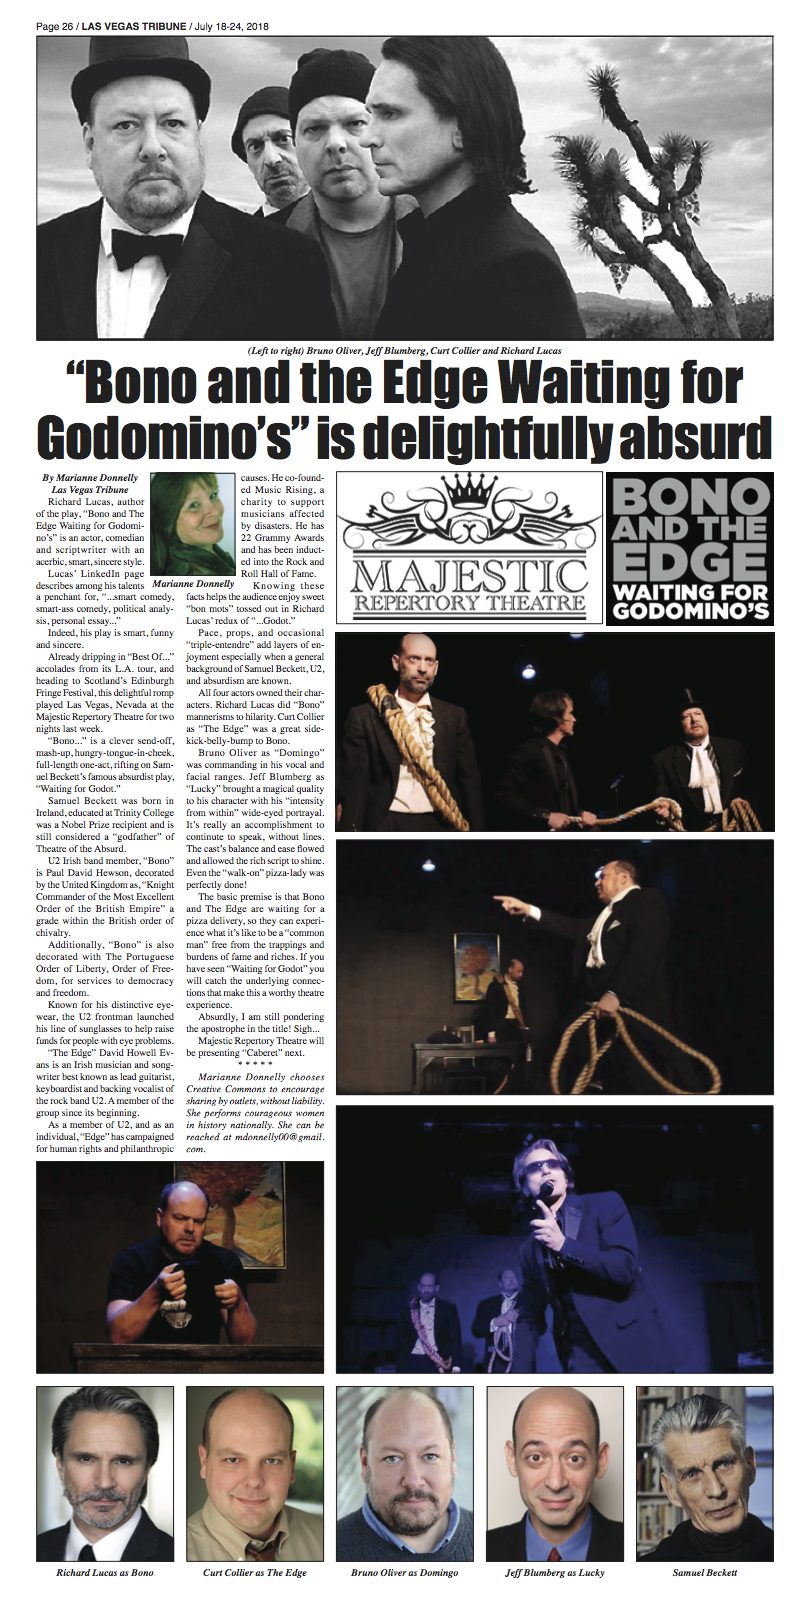 Richard Lucas' award-winning play, Bono and The Edge Waiting for Godomino's, featured in NoHoArtsDisctrict.com